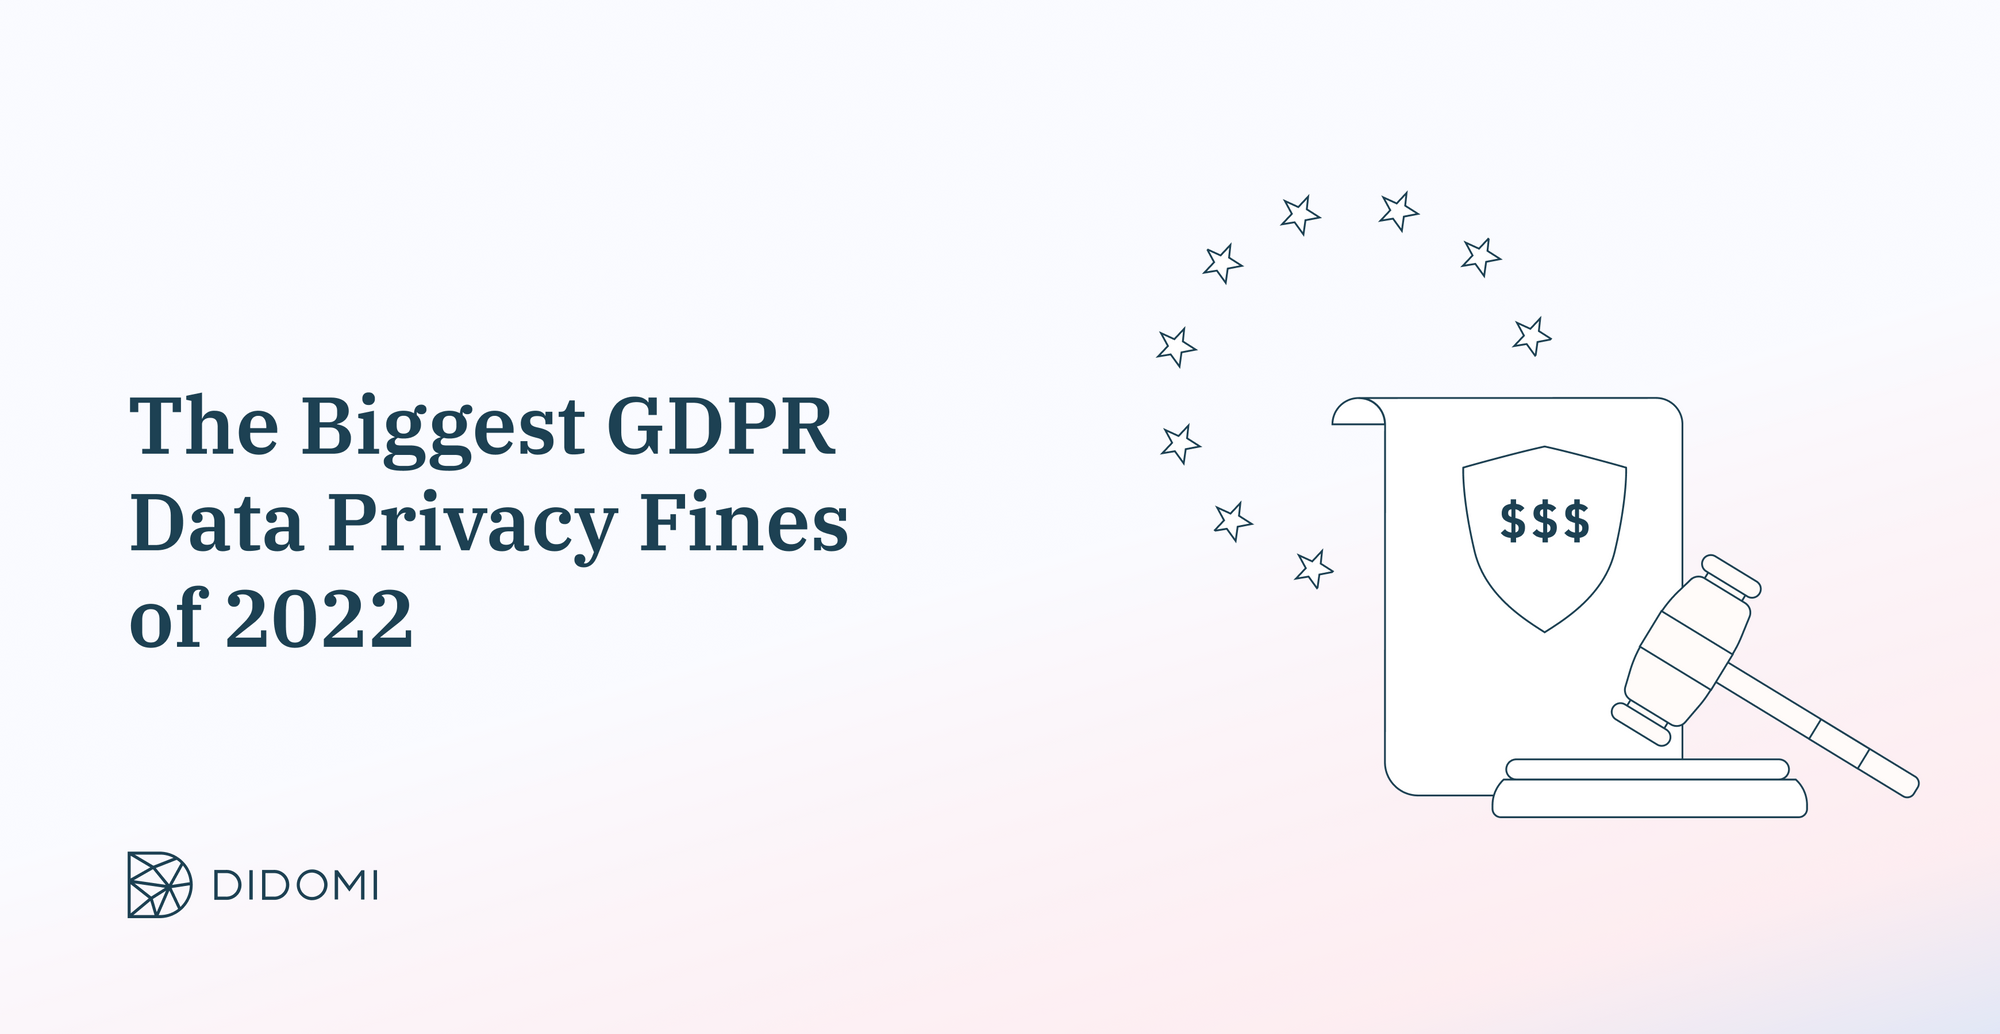 The biggest GDPR data privacy fines of 2022